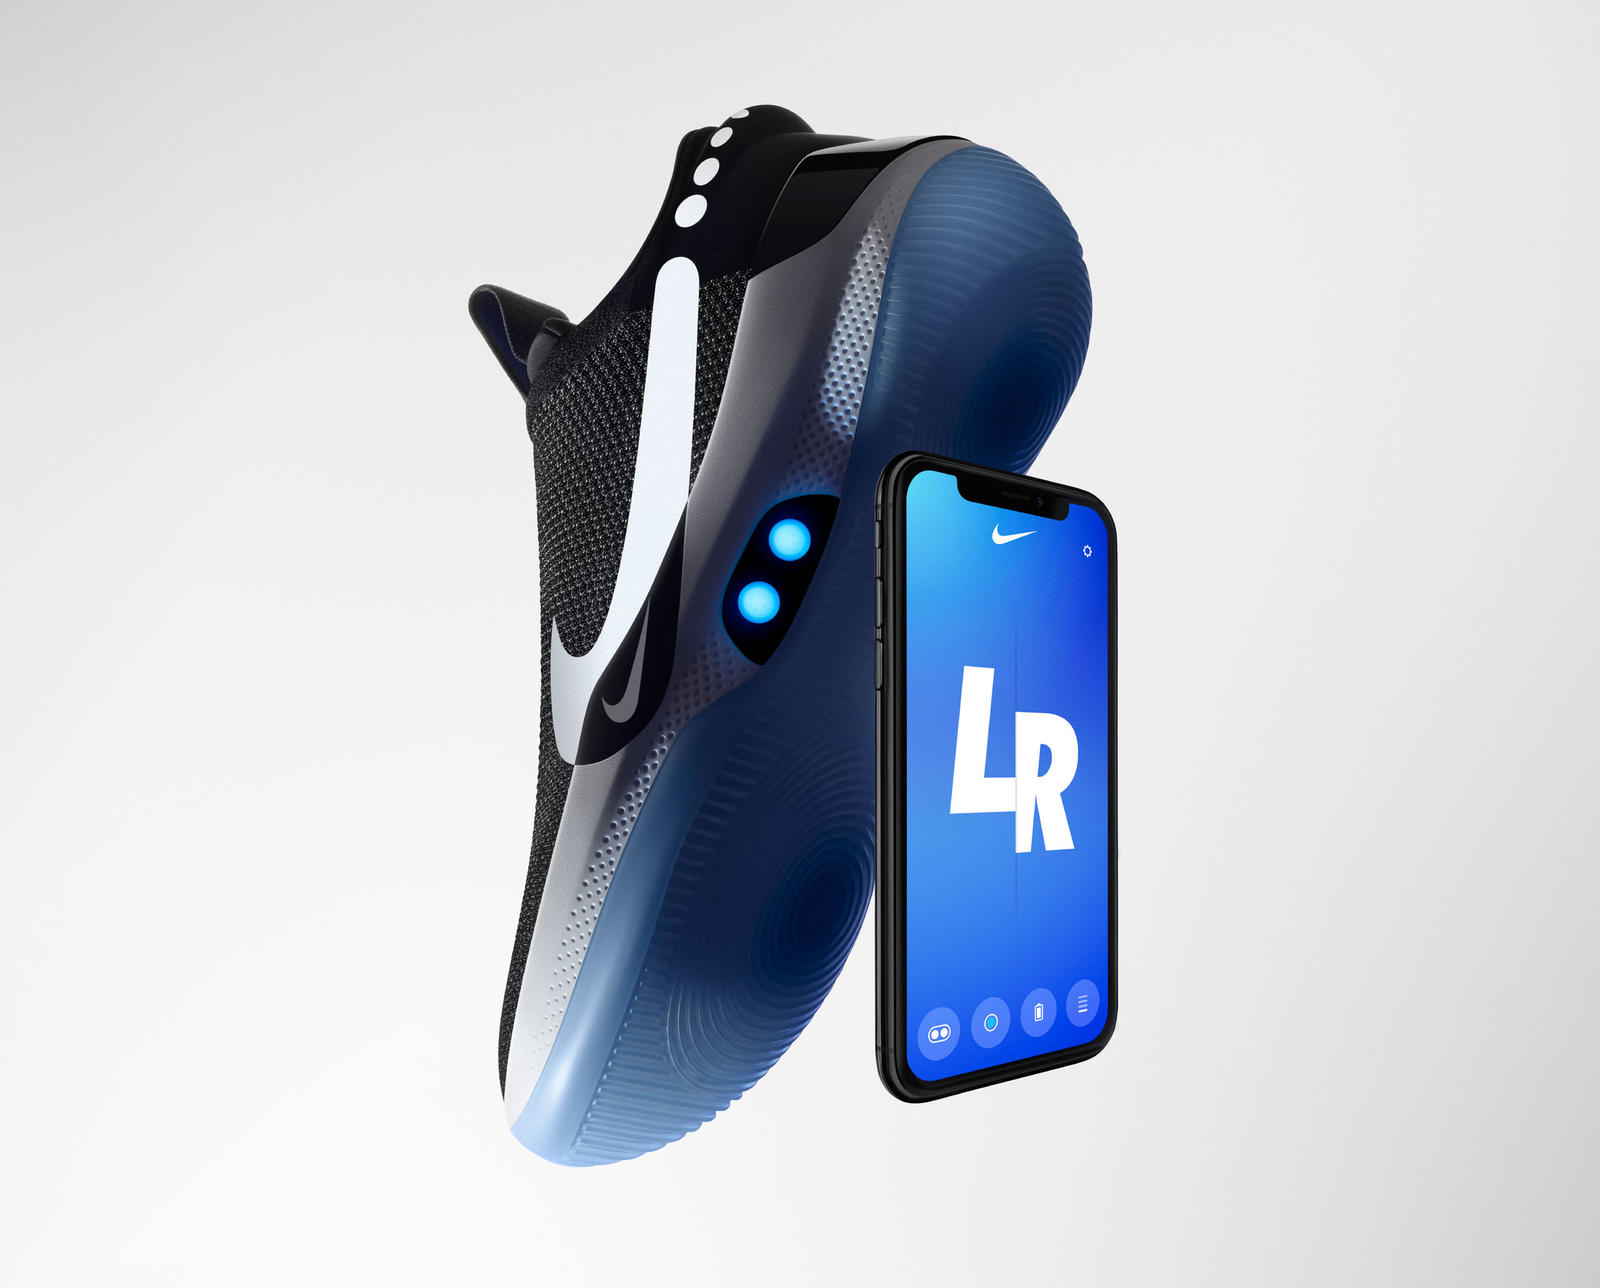 nike shoes with bluetooth